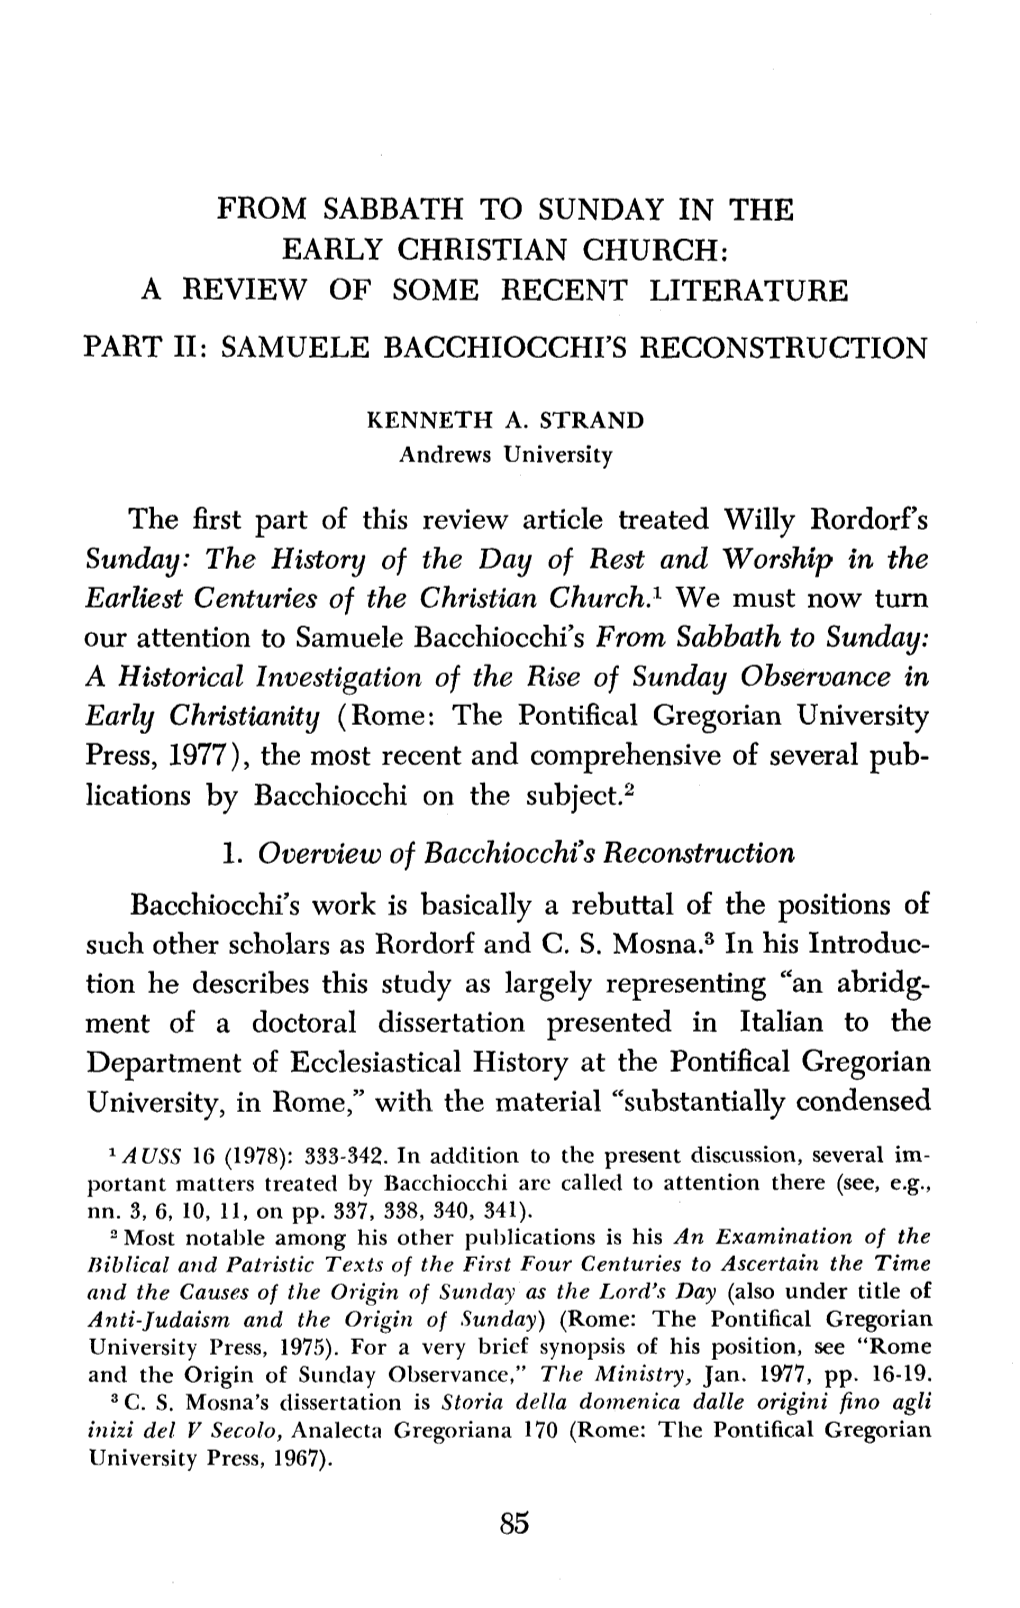 From Sabbath to Sunday in the Early Christian Church: a Review of Some Recent Literature Part 11: Samuele Bacchiocchi's Reconstruction